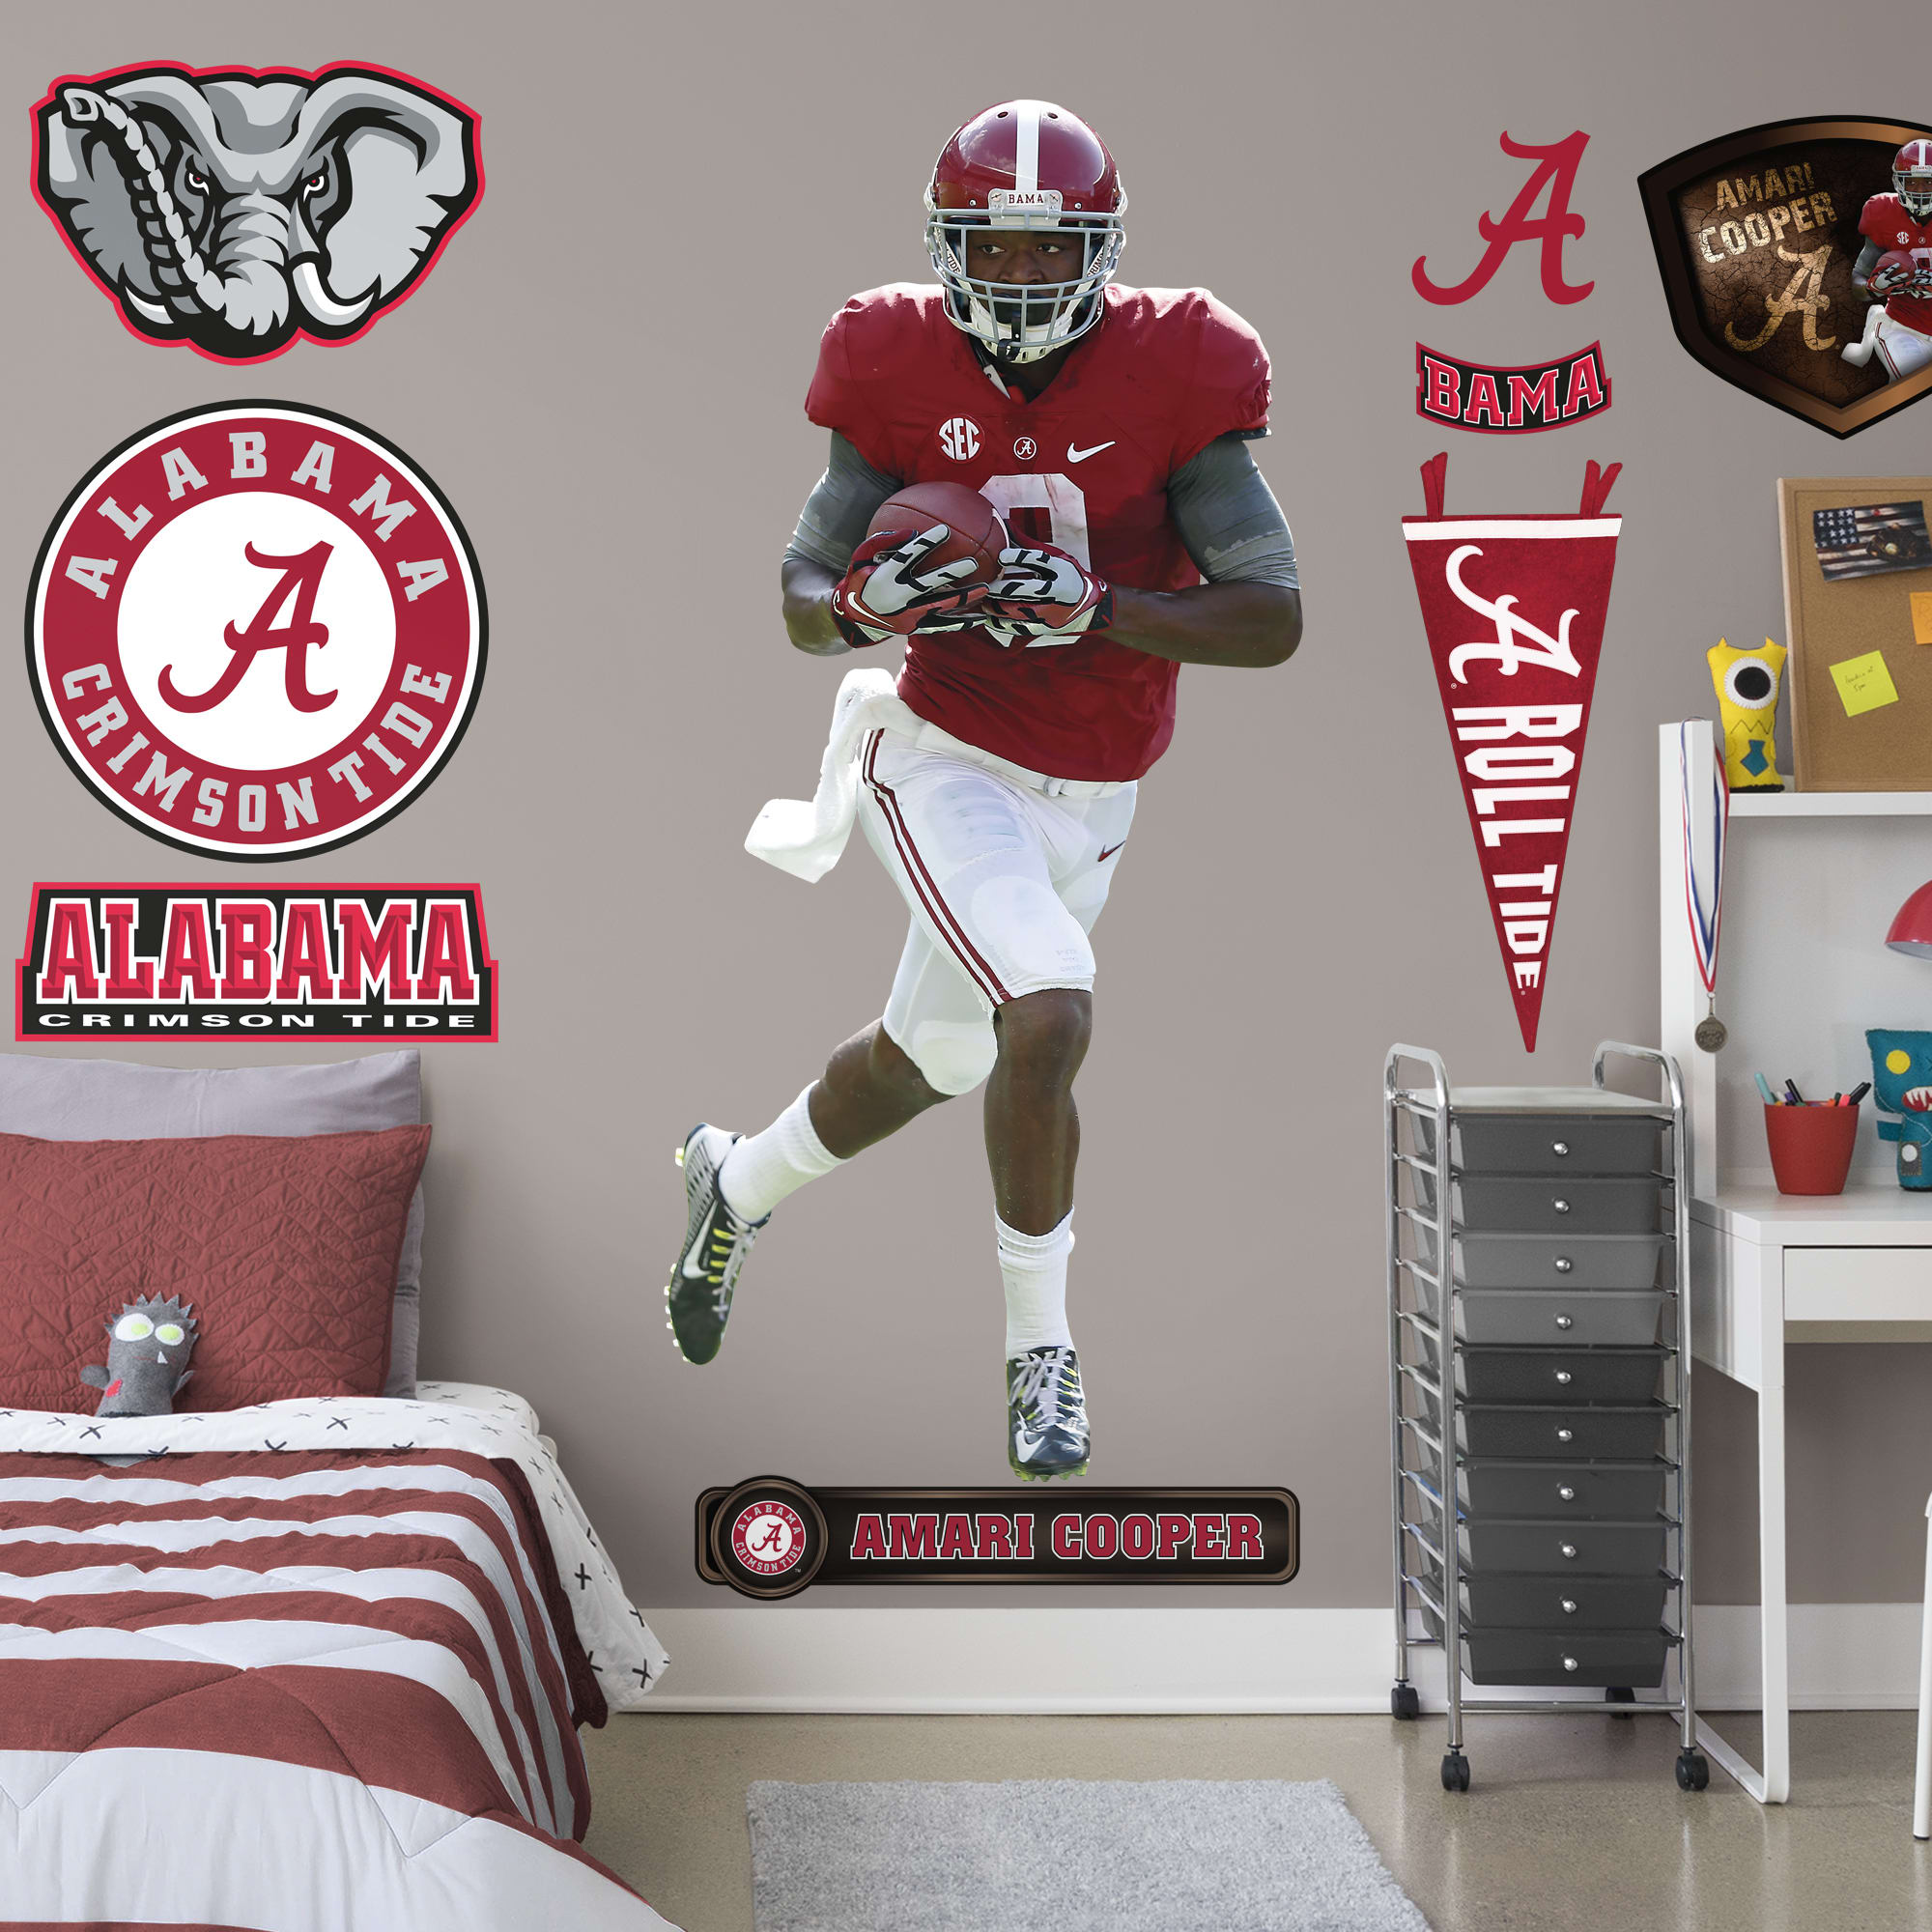 Amari Cooper for Alabama Crimson Tide: Alabama - Officially Licensed Removable Wall Decal Life-Size Athlete + 2 Decals (35"W x 7